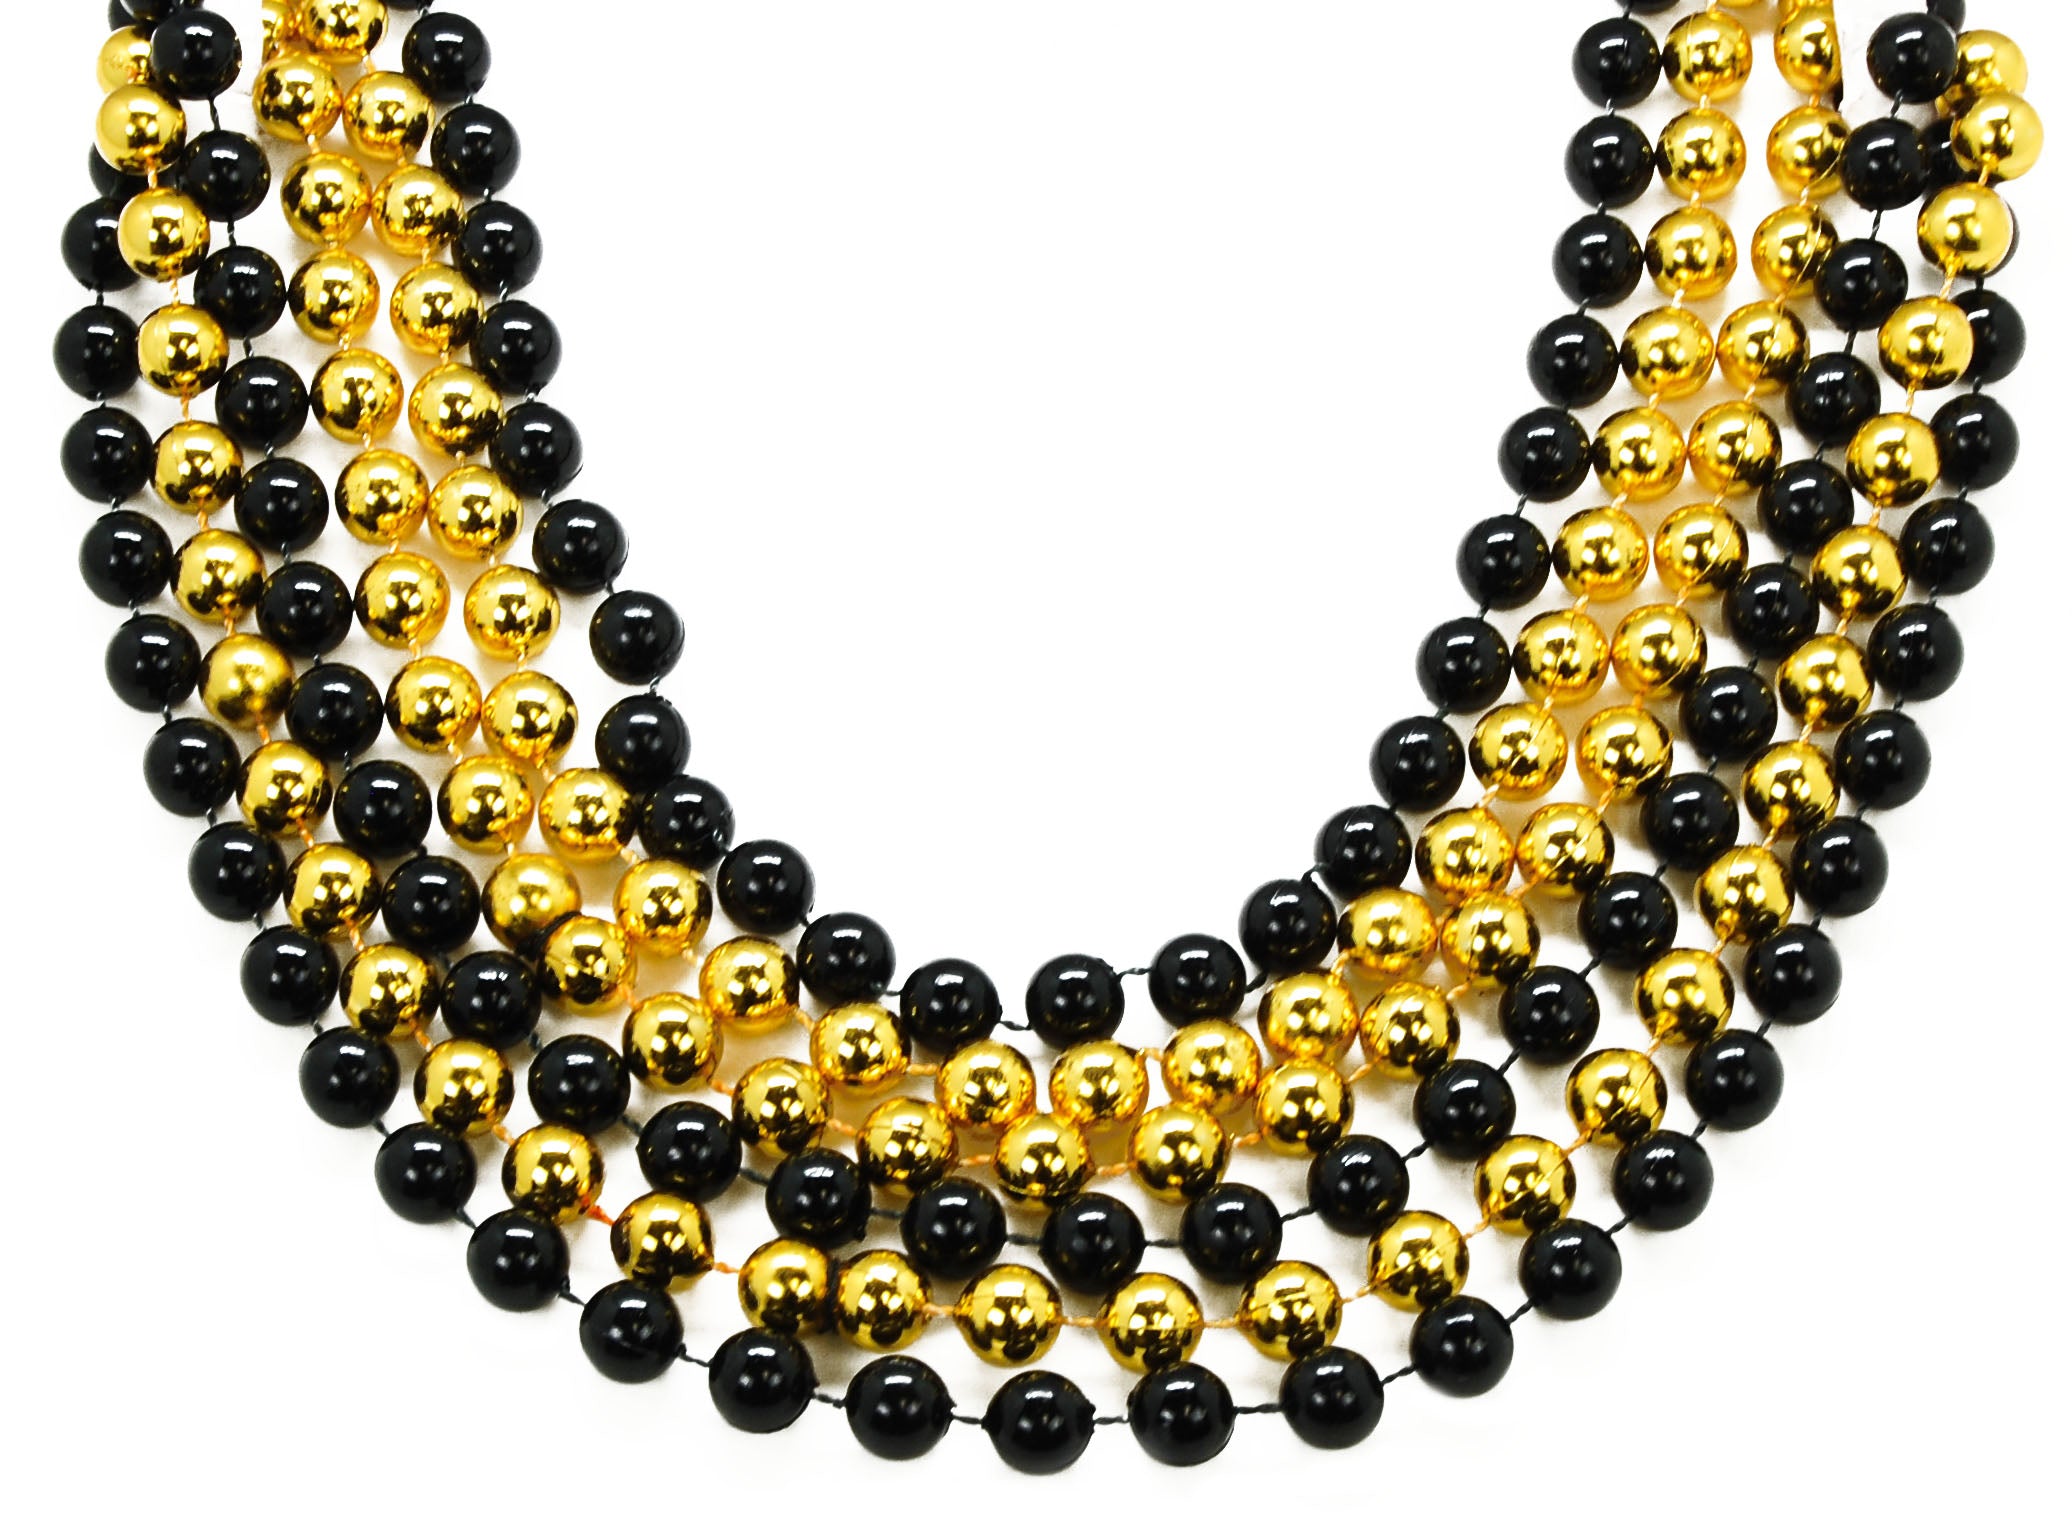 12mm Black and Gold Round Beads